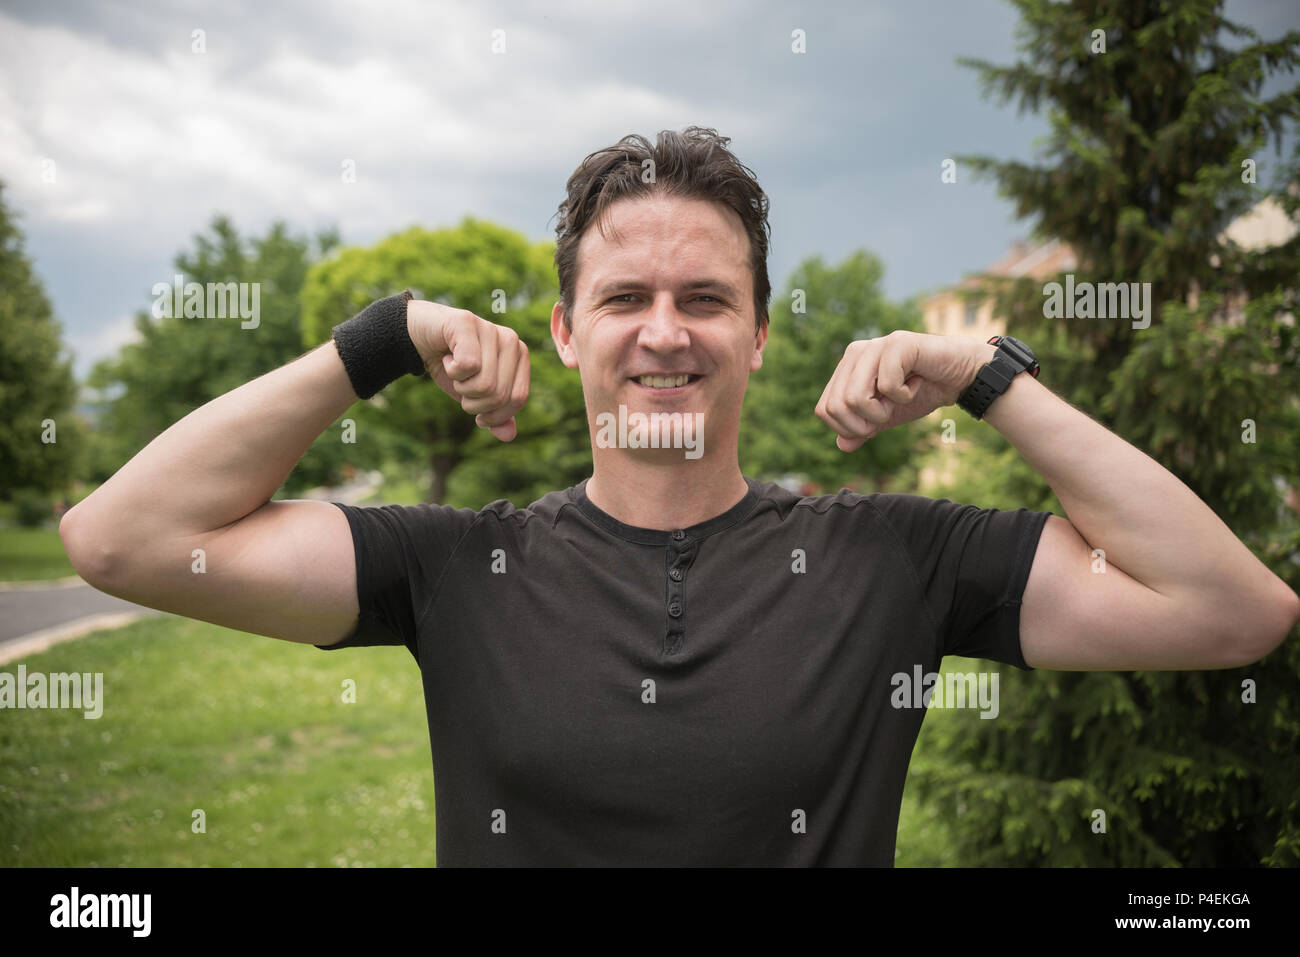 Smiling man standing in park flexing his muscles Stock Photo